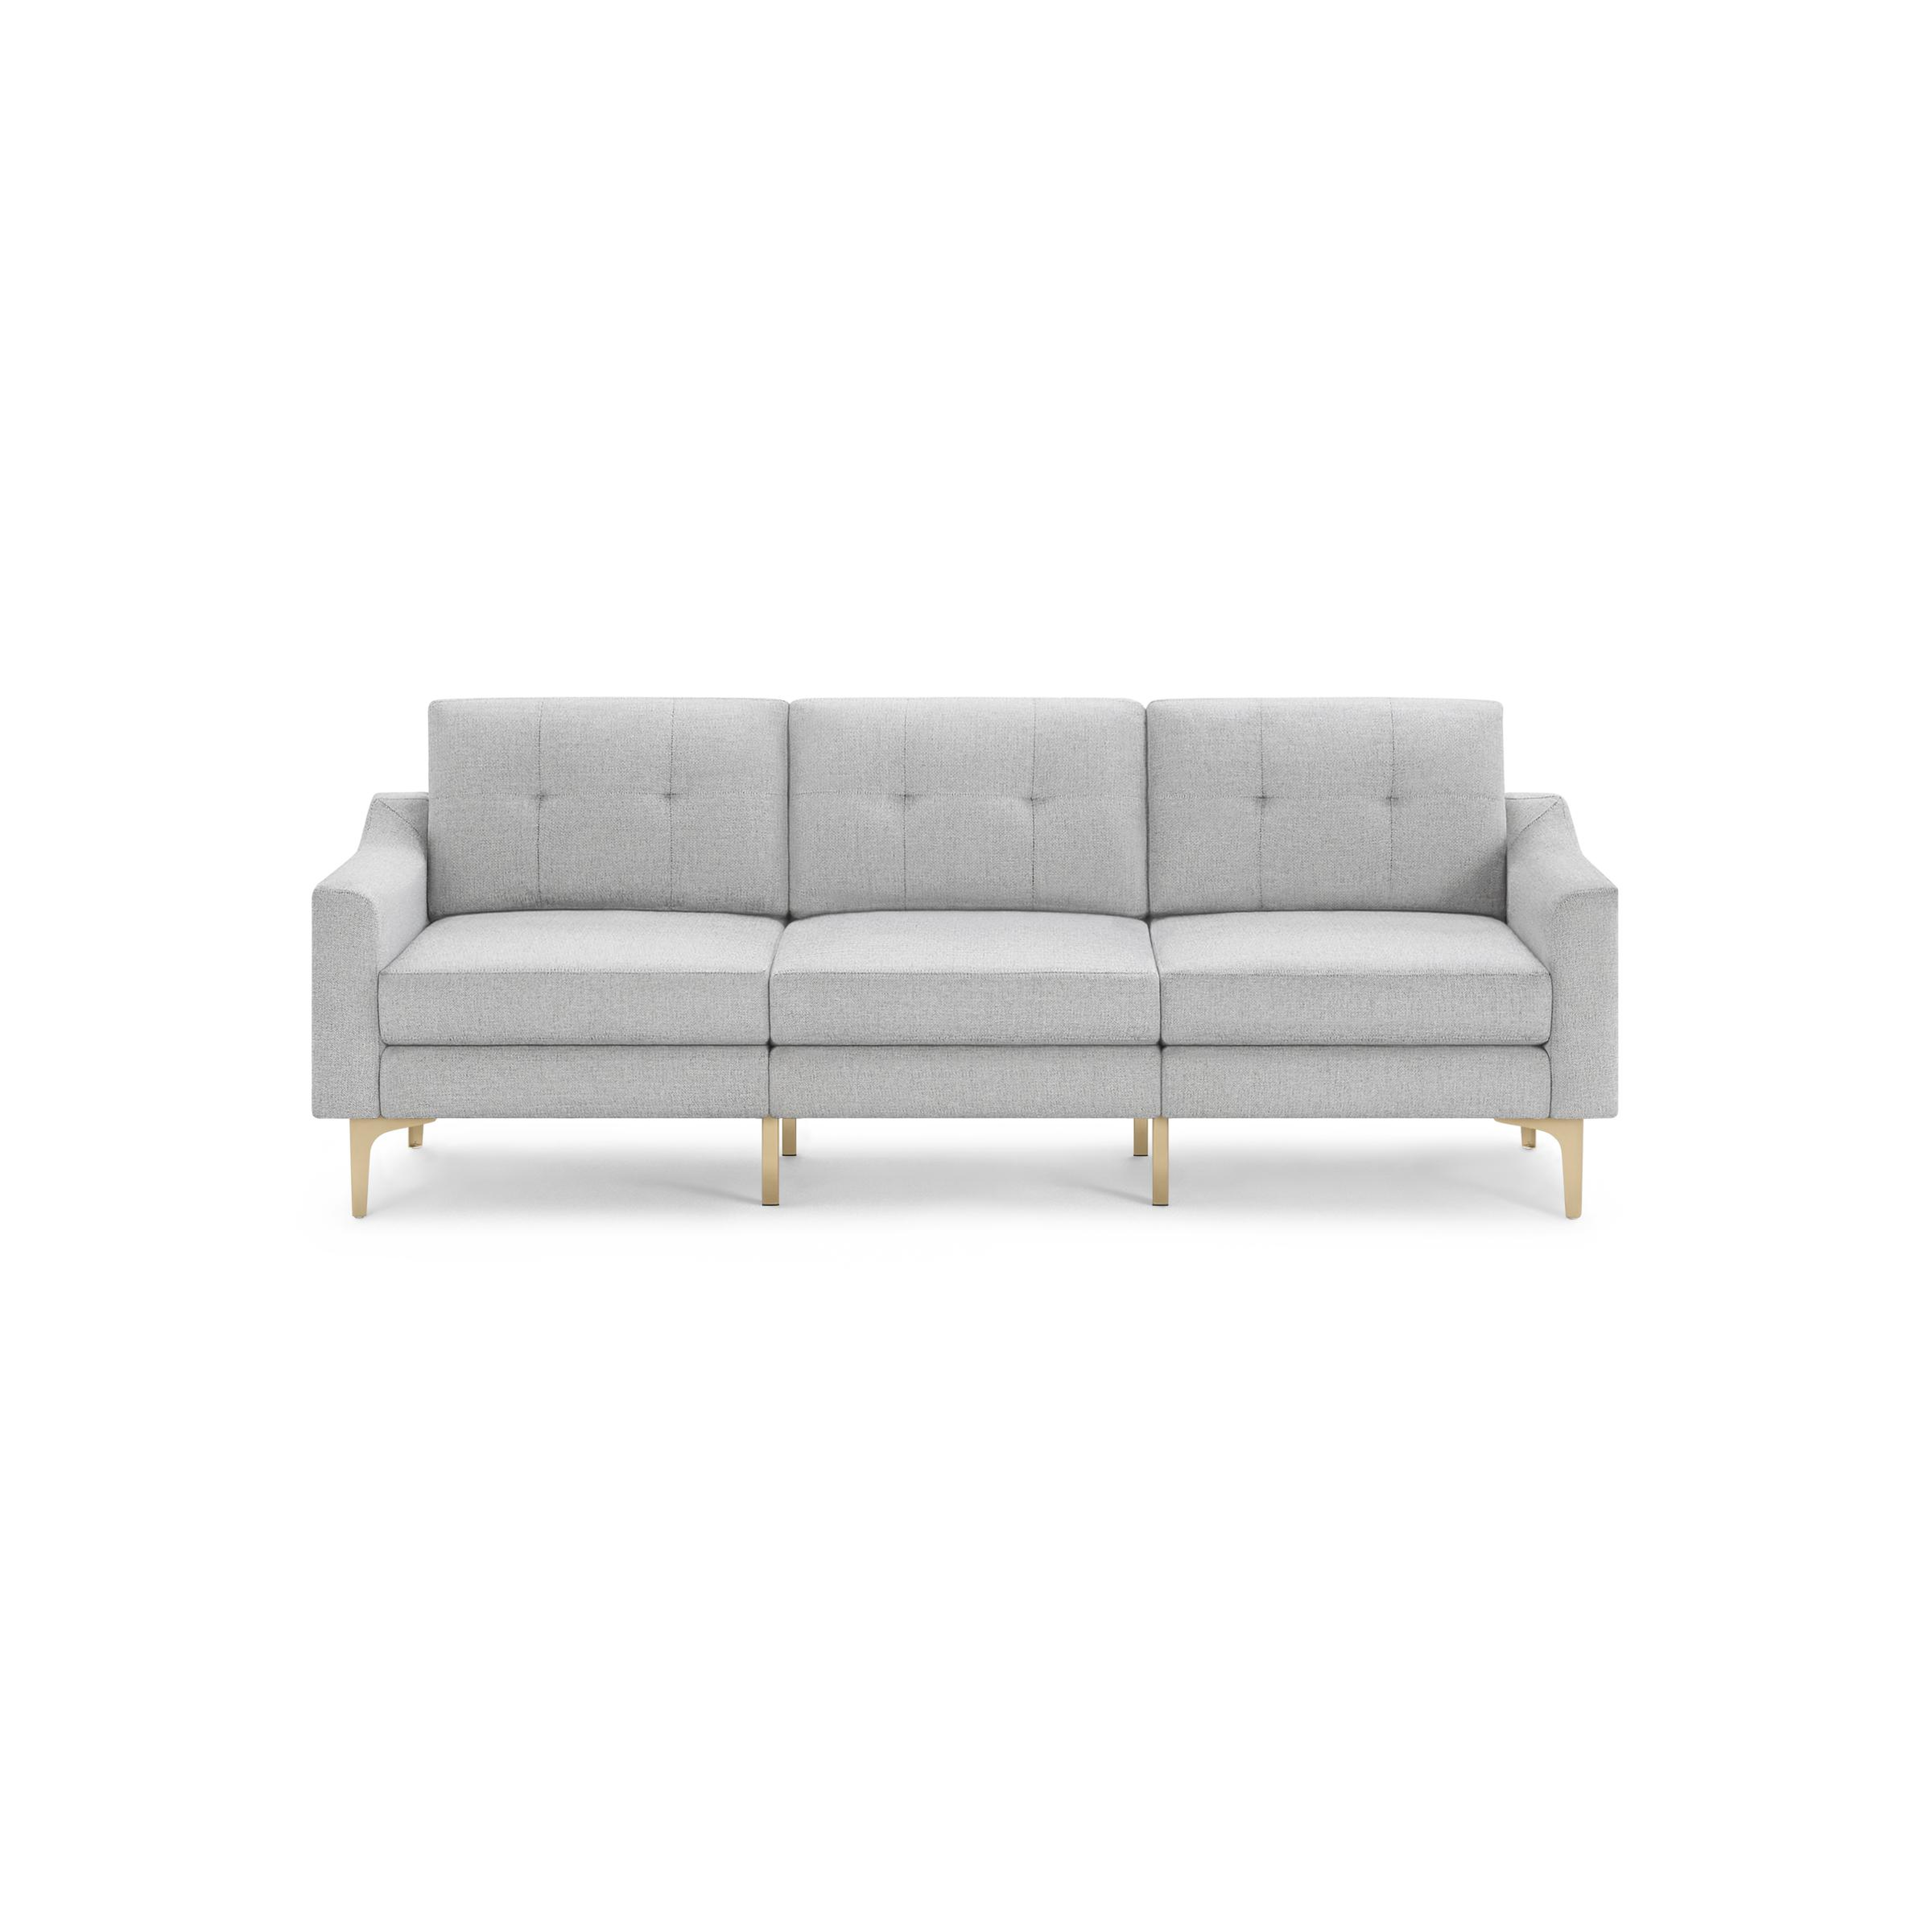 Nomad Sofa in Crushed Gravel, Brass Legs - Burrow